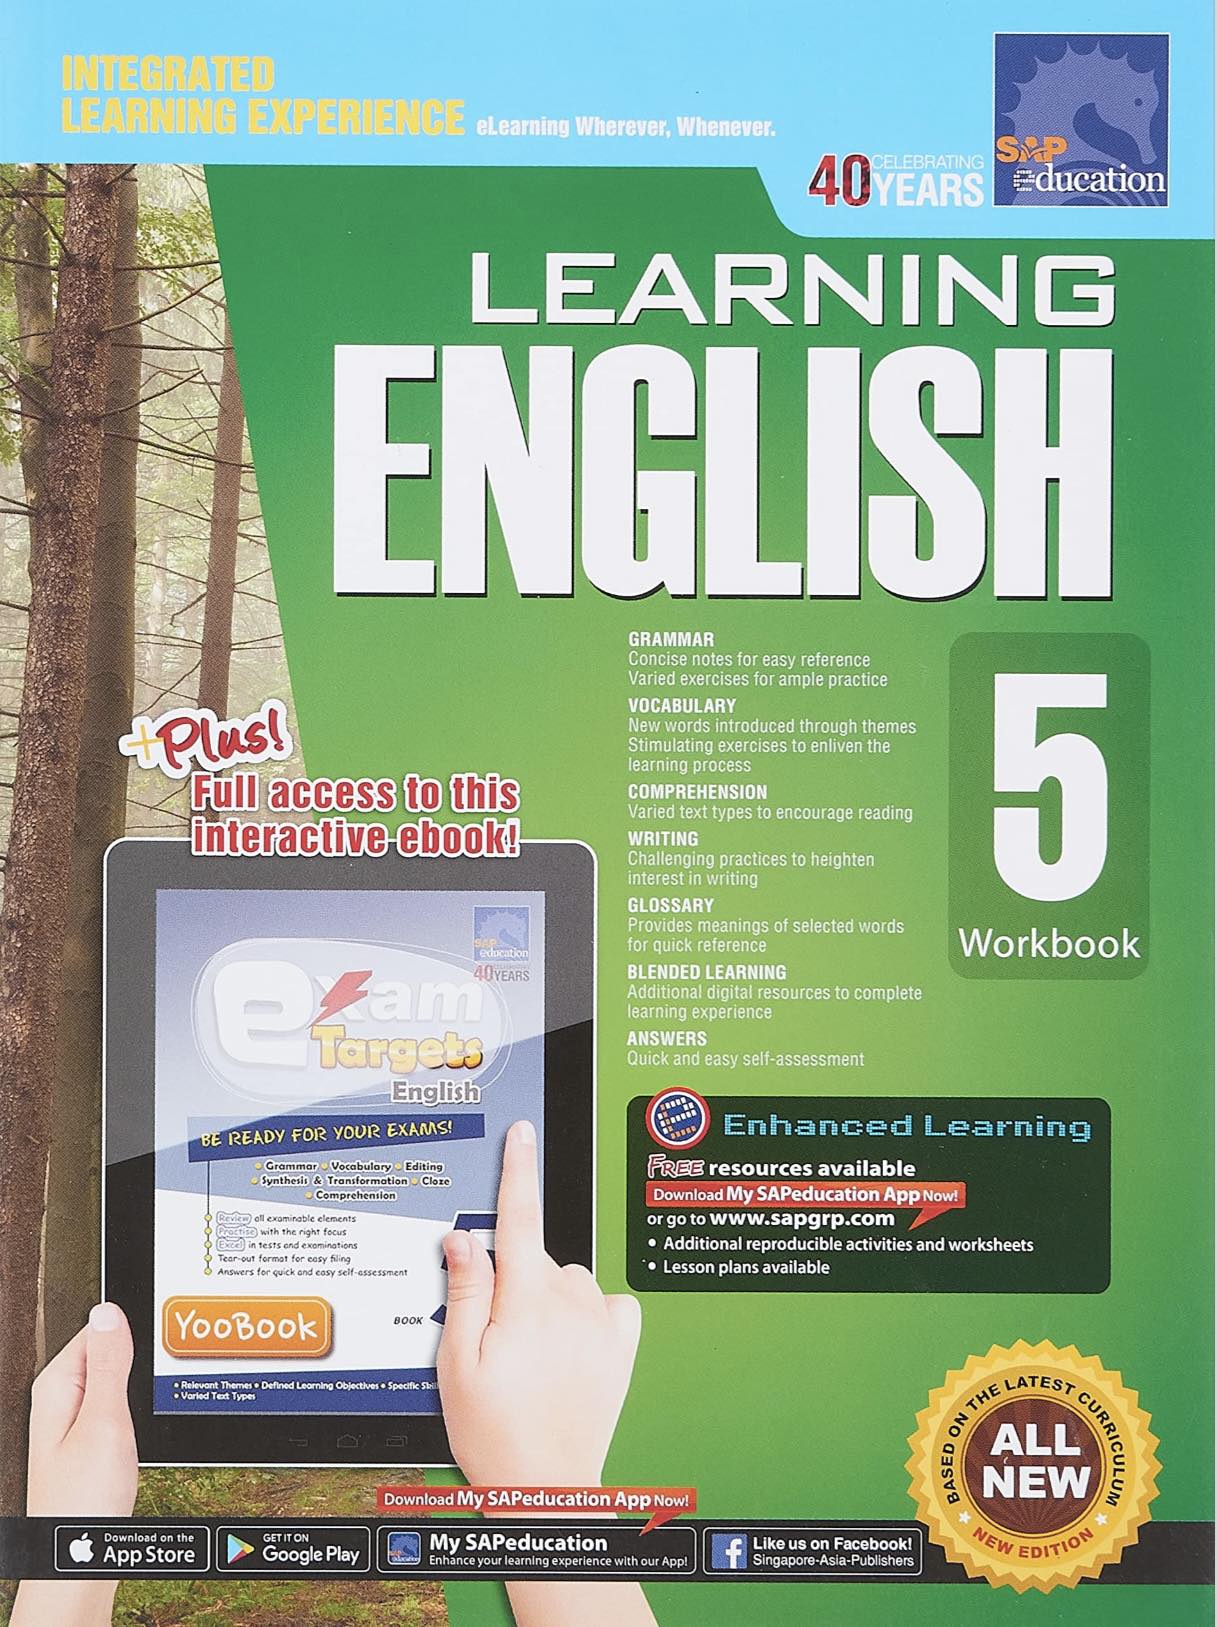 Learning English Workbook for Primary Levels